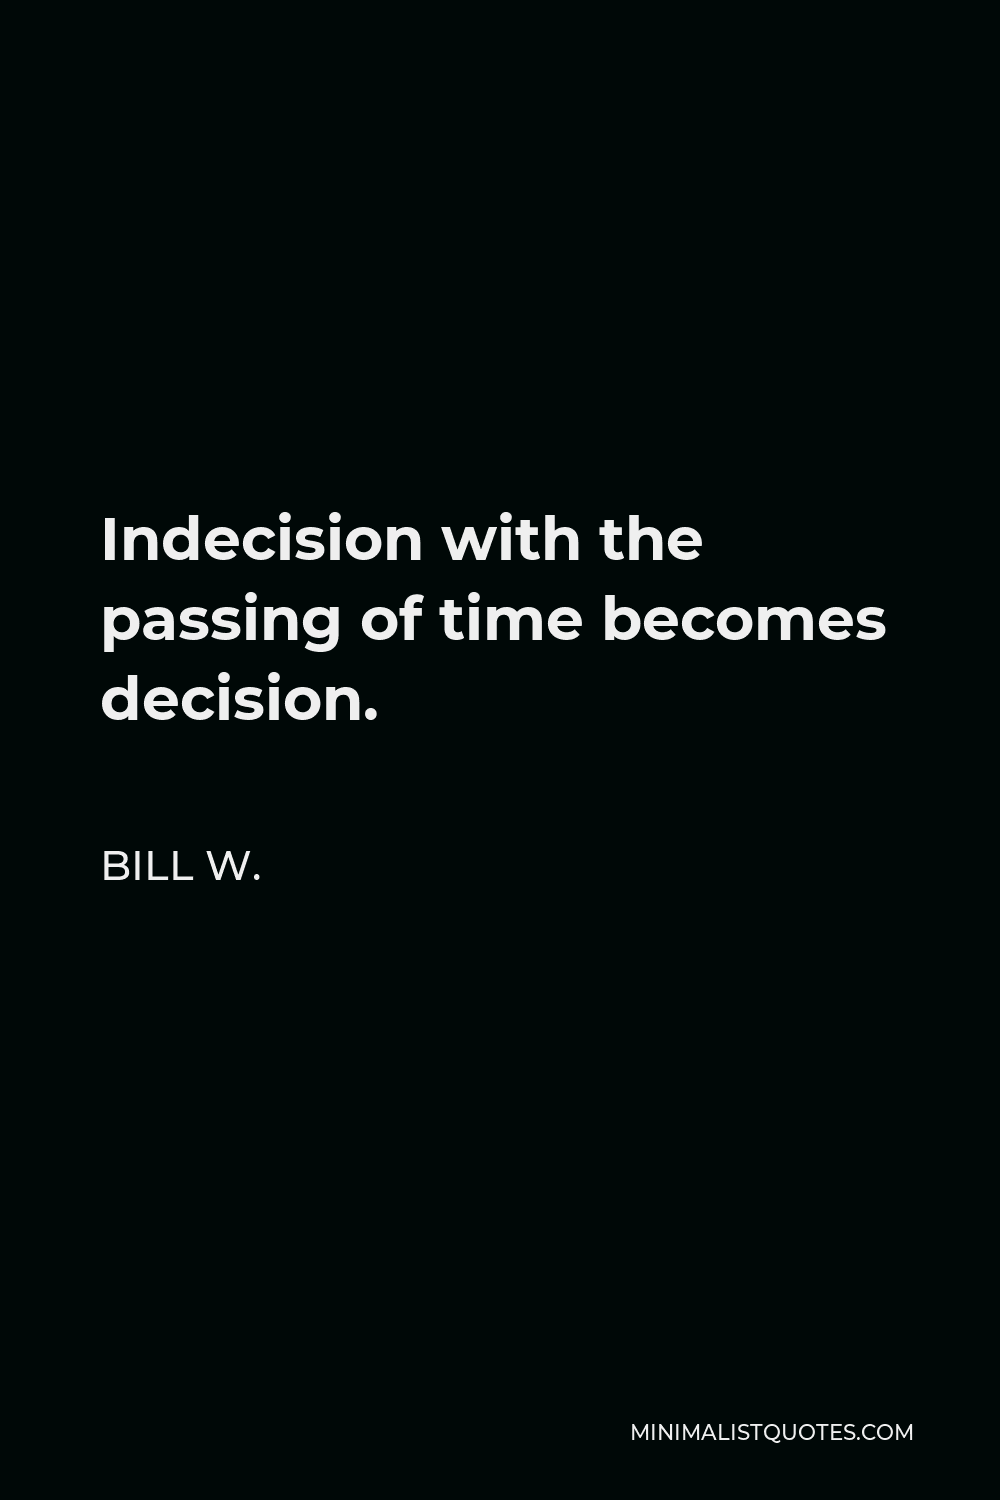 Bill W. Quote - Indecision with the passing of time becomes decision.